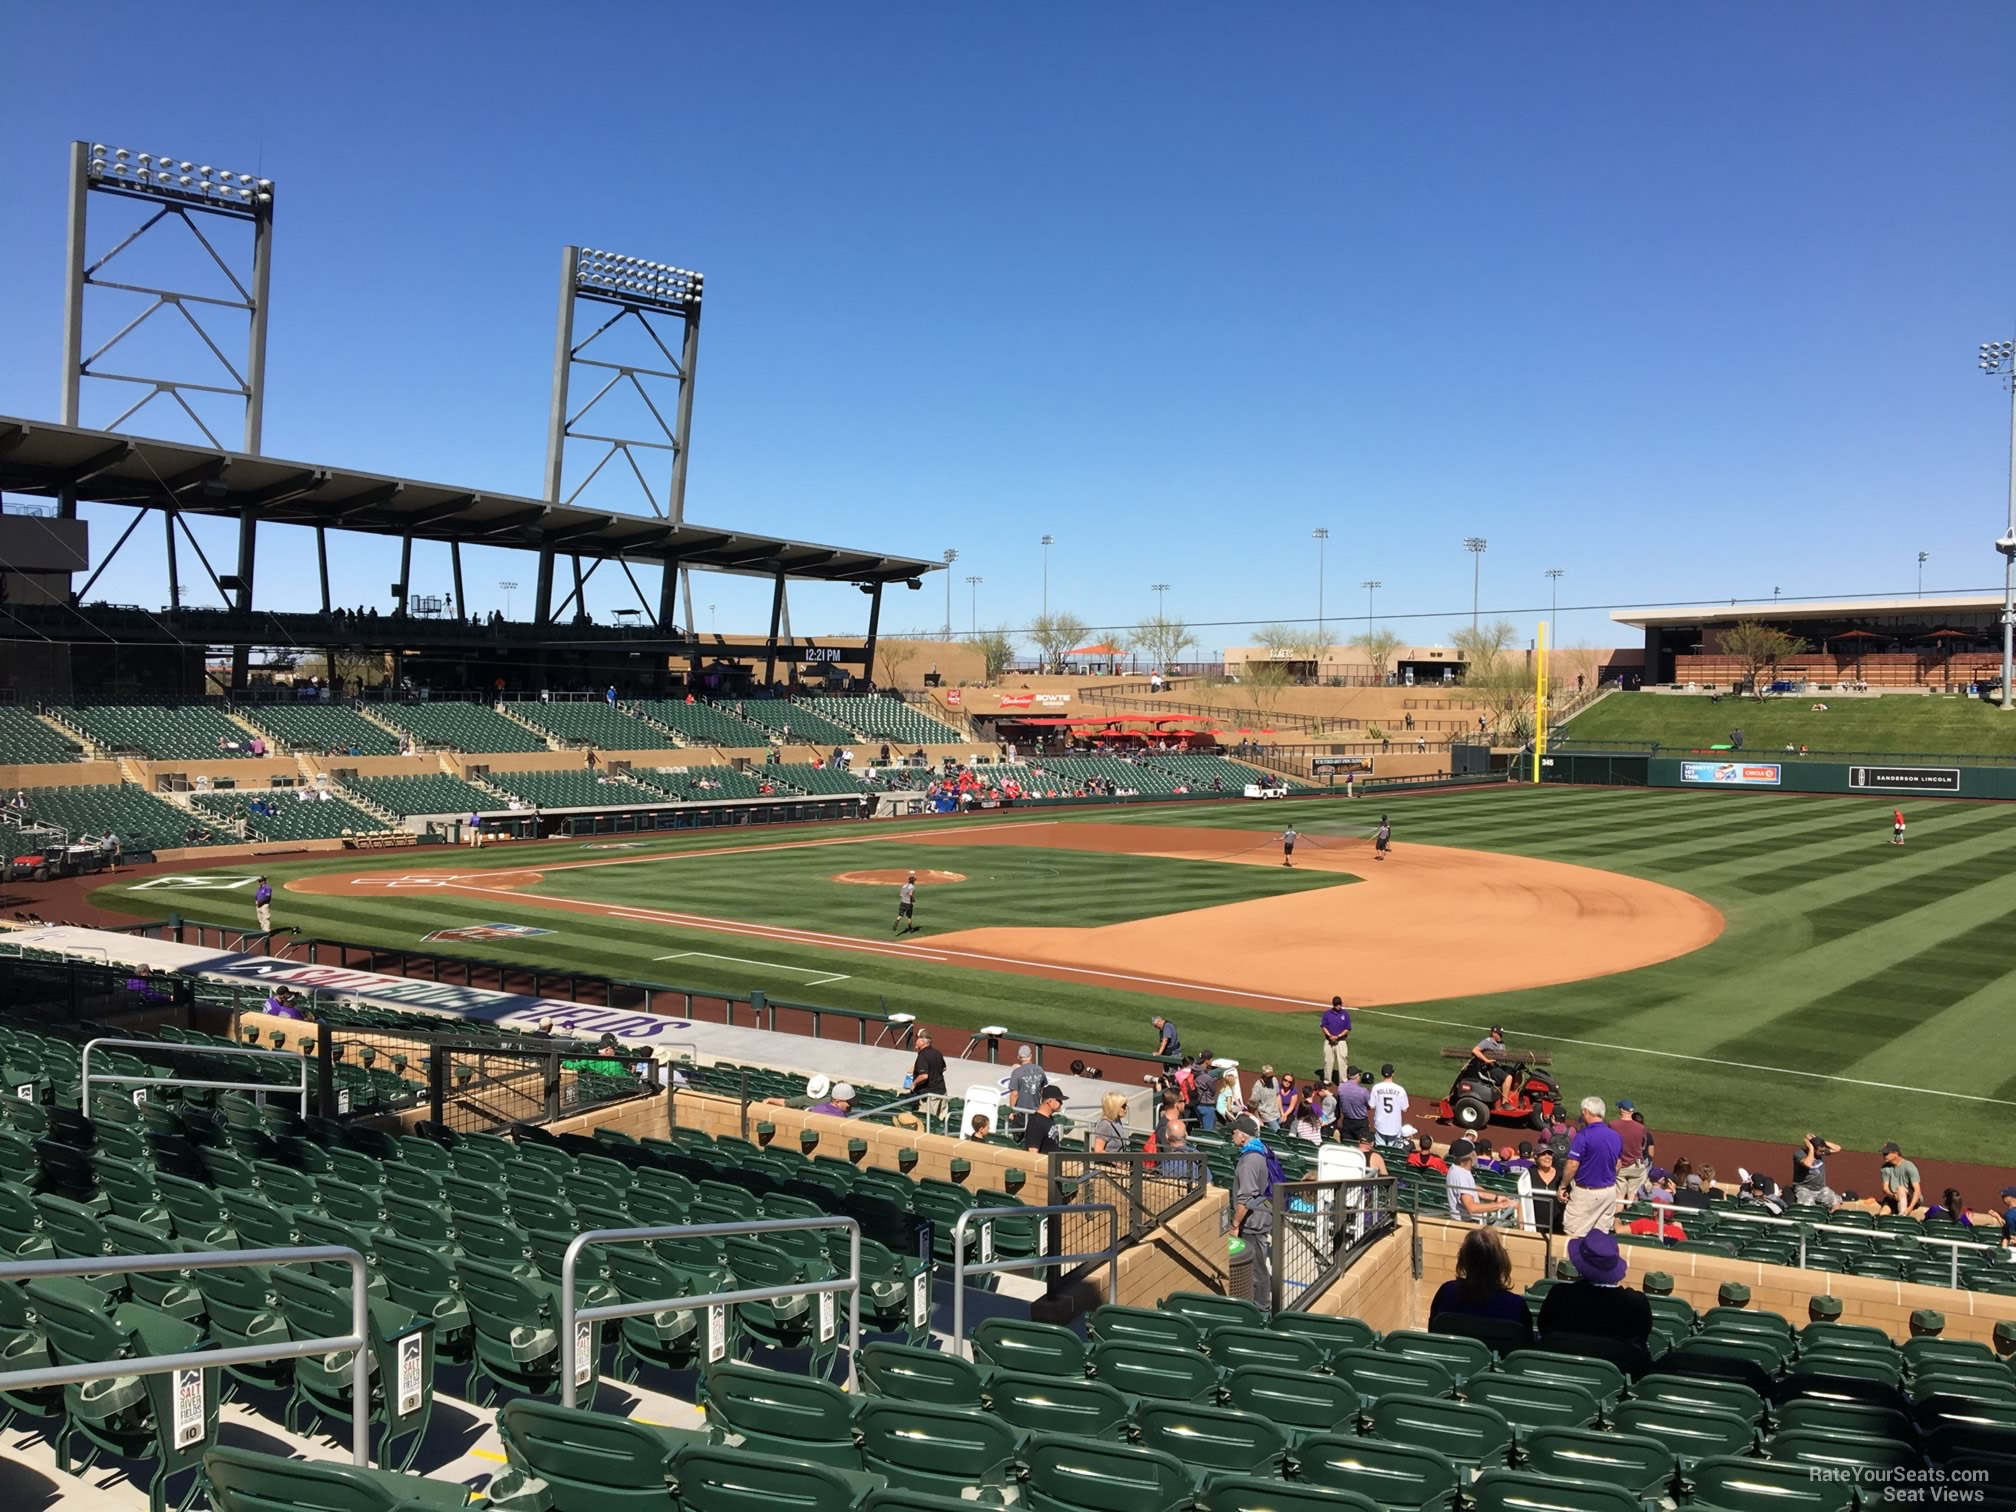 Section 203 at Salt River Field at Talking Stick